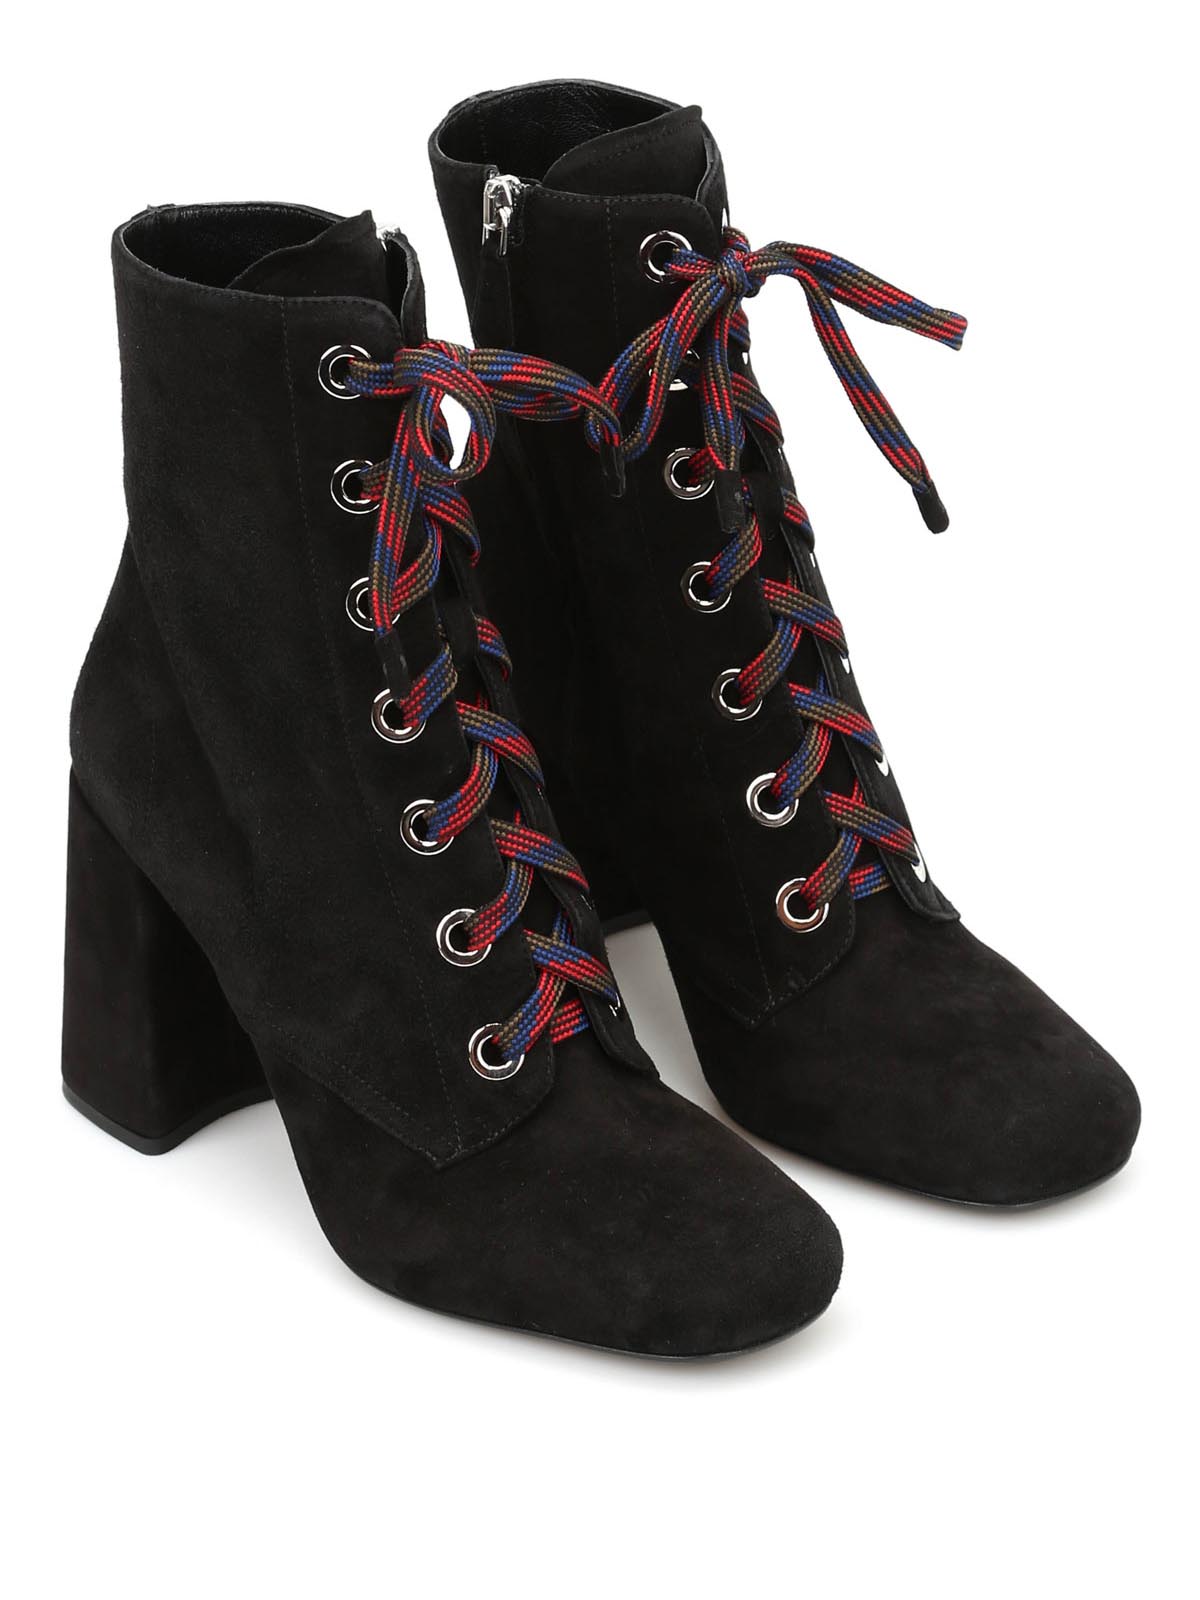 contrast Voorouder Vertrouwen op Ankle boots Prada - Lace-up suede ankle boots - 1T201H008F000207